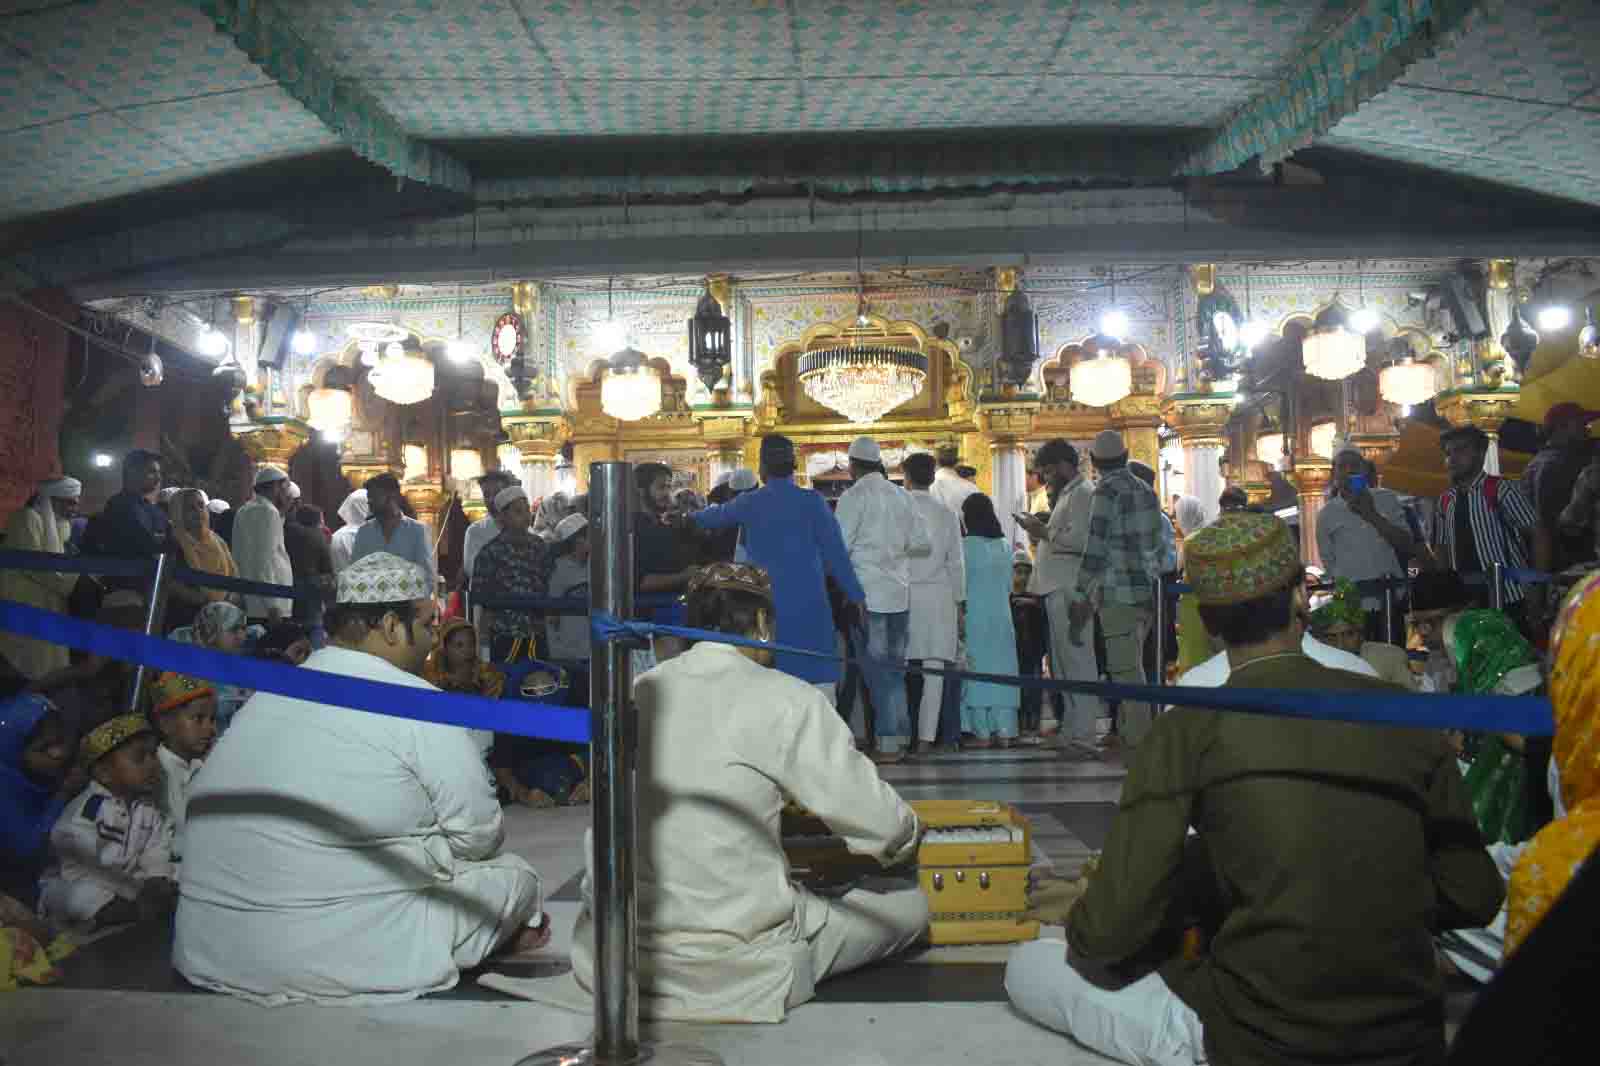 https://www.hindi.awazthevoice.in/upload/news/168528099302_Meet_the_family_that_has_been_hosting_Qawwali_gatherings_at_Nizamuddin_Dargah_for_75_years_3.jpg